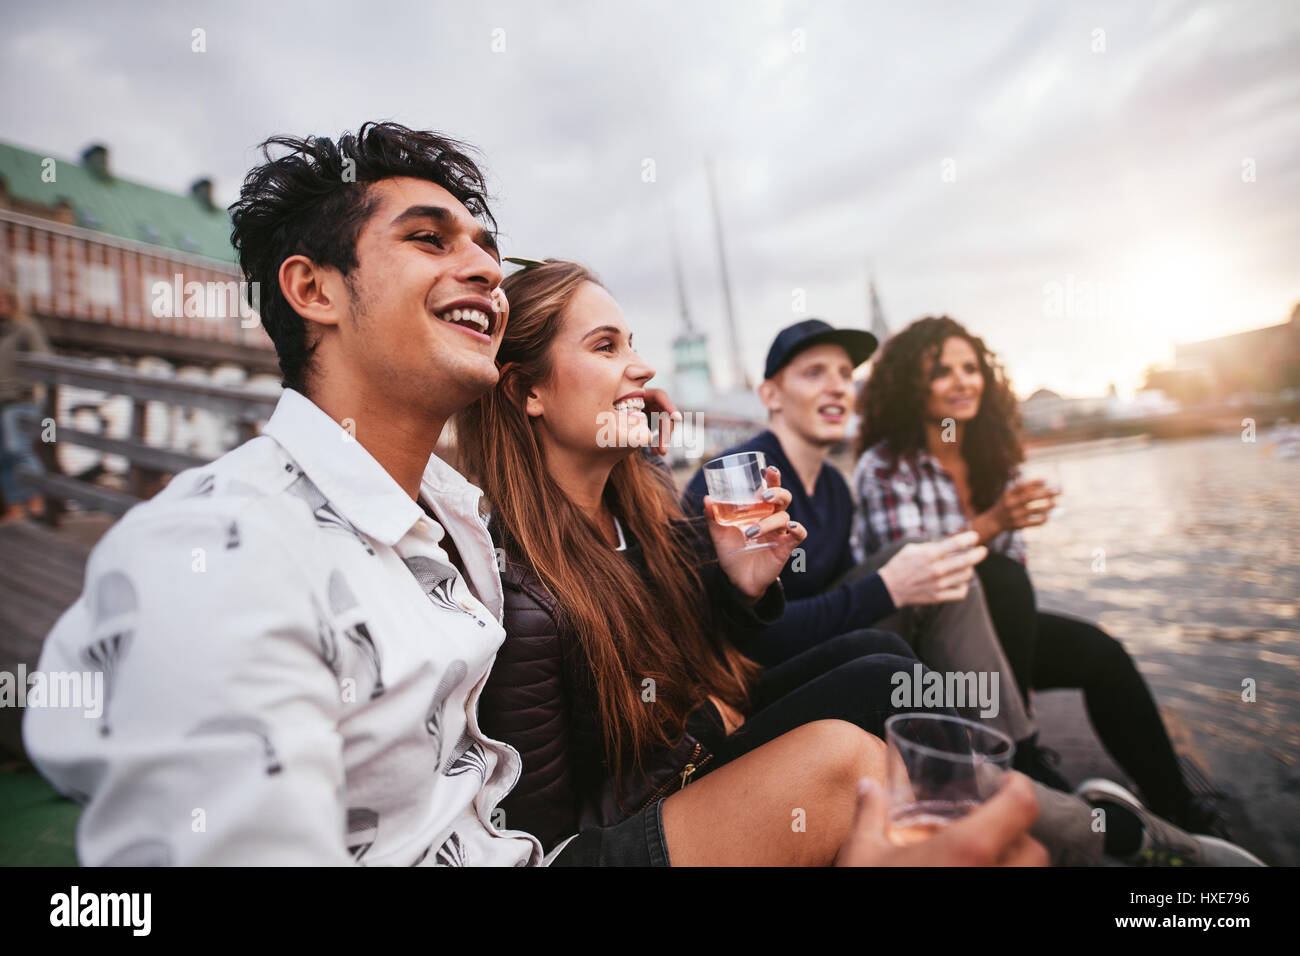 Group of young people having fun with drinks. They are sitting together by the lake and looking away smiling. Stock Photo